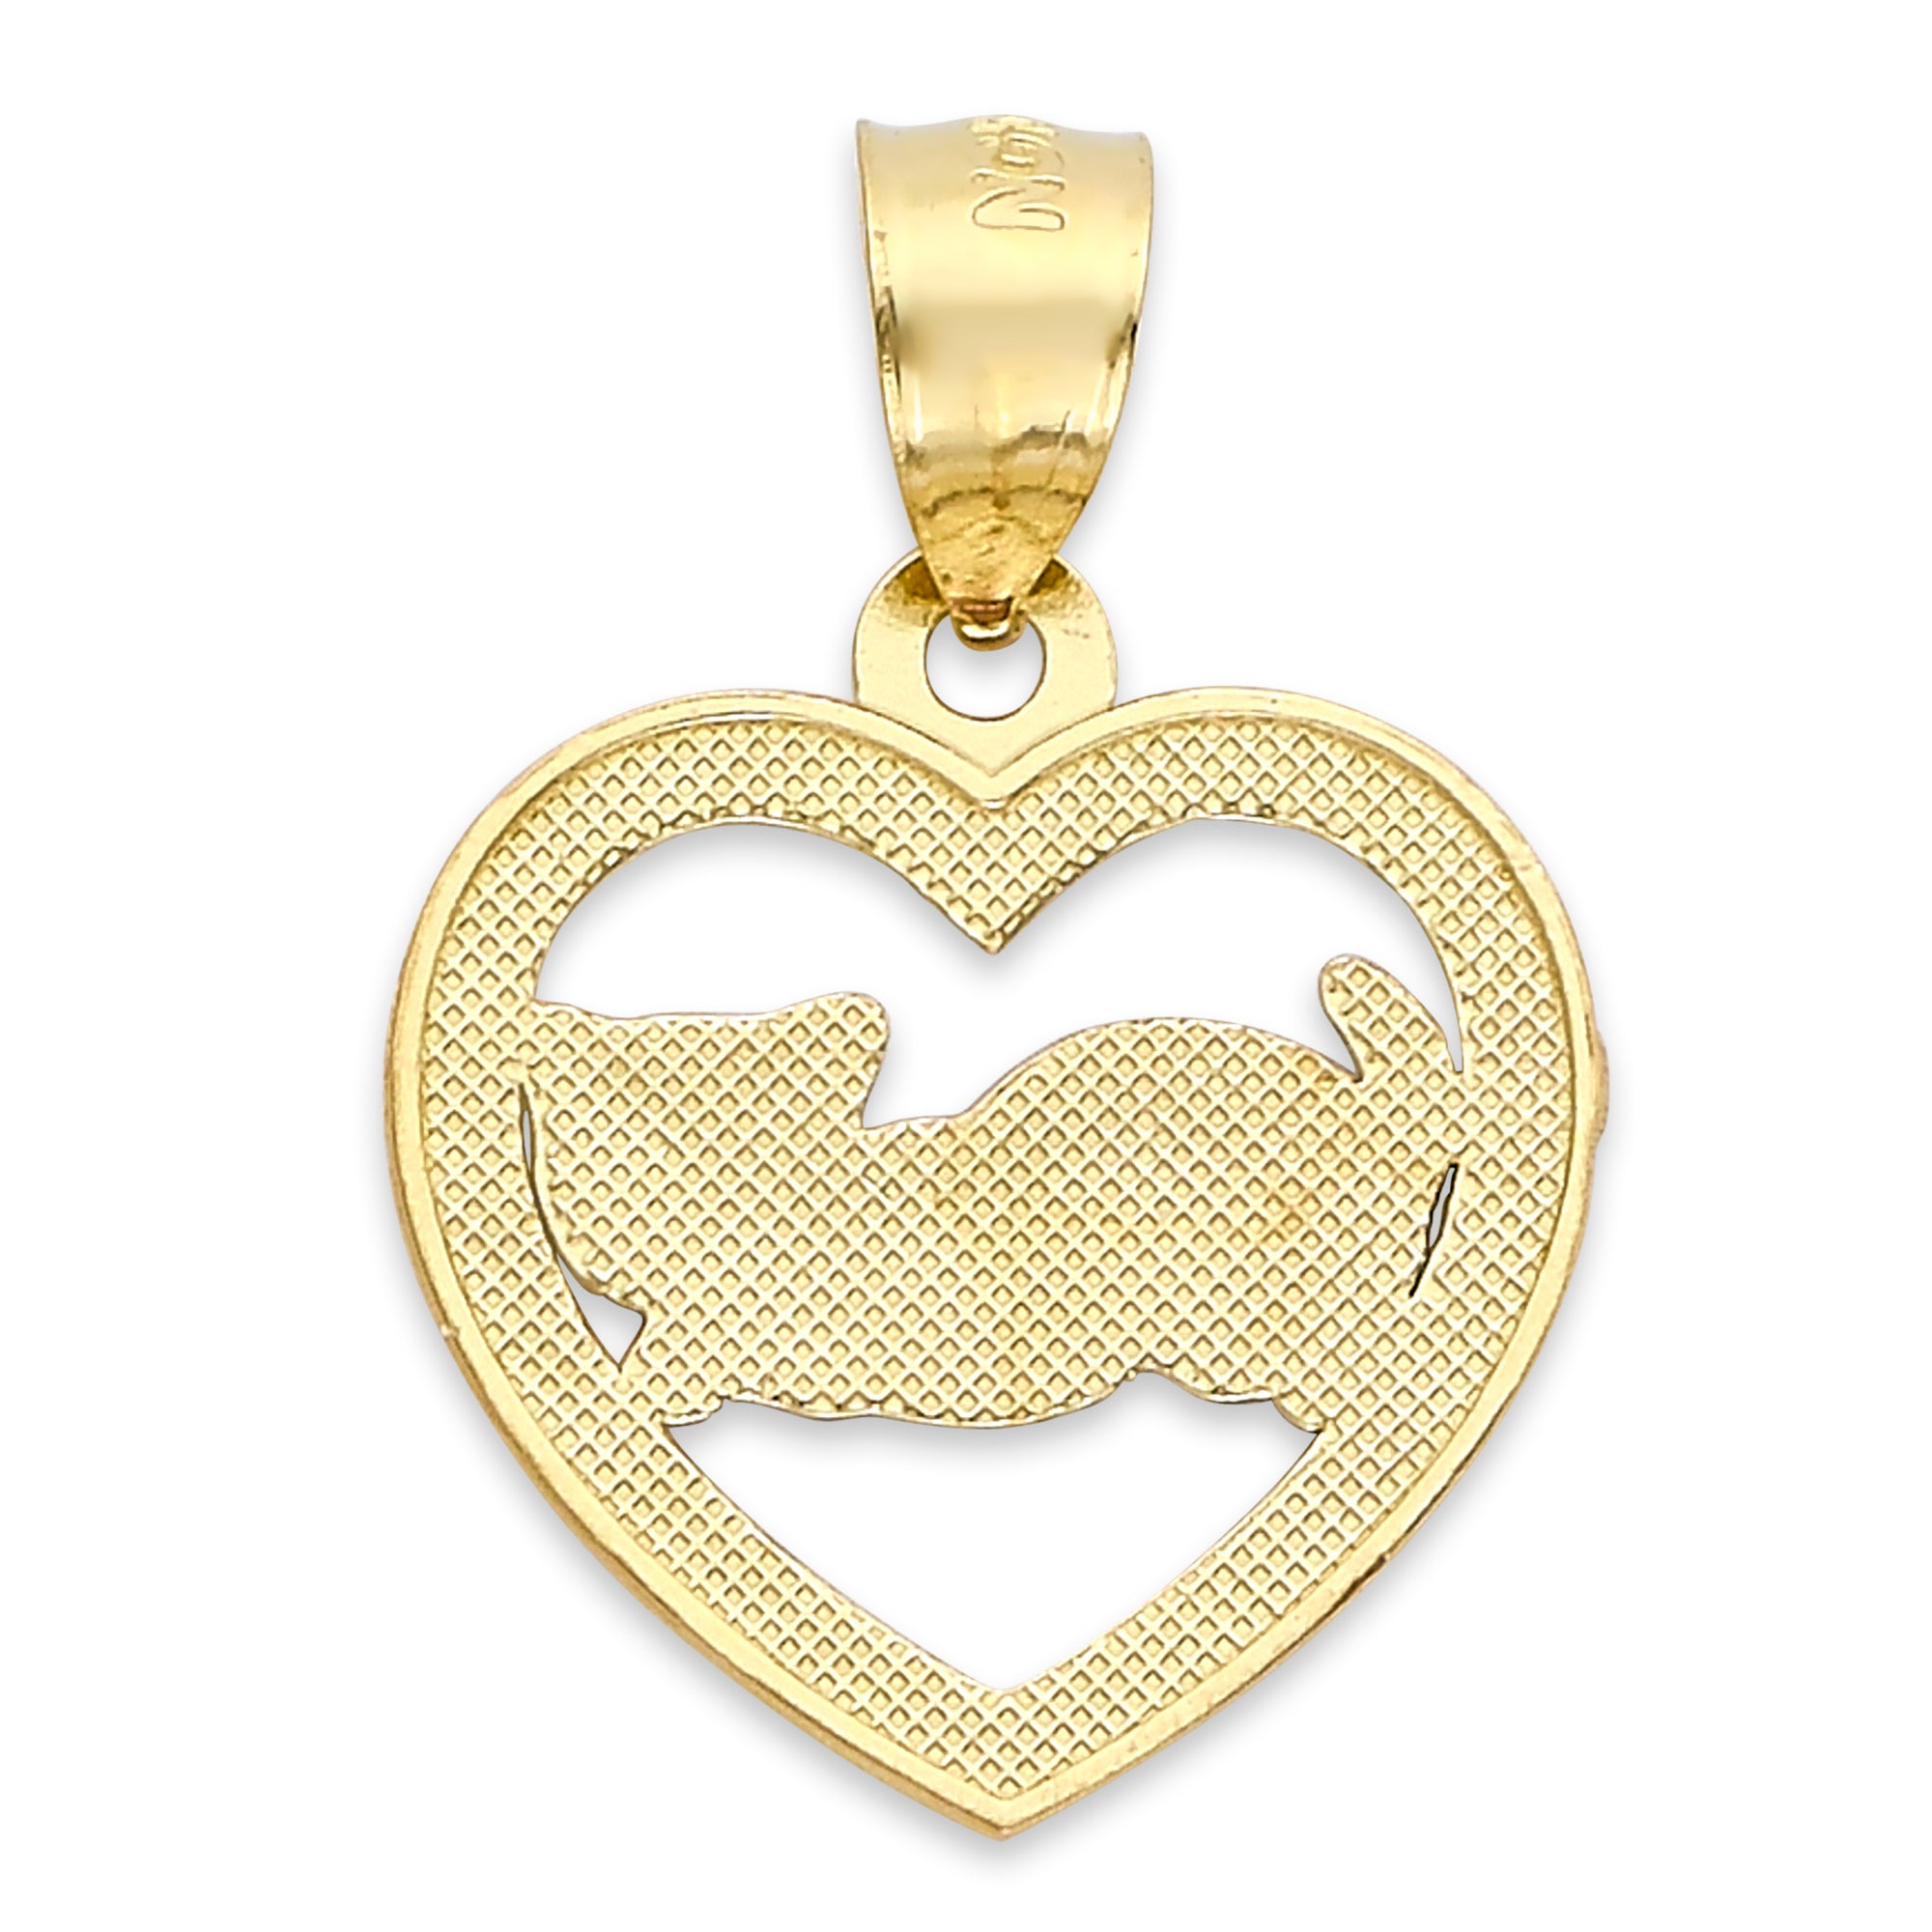 Solid Two-Tone Gold Cat in Heart Pendant - 10k or 14k